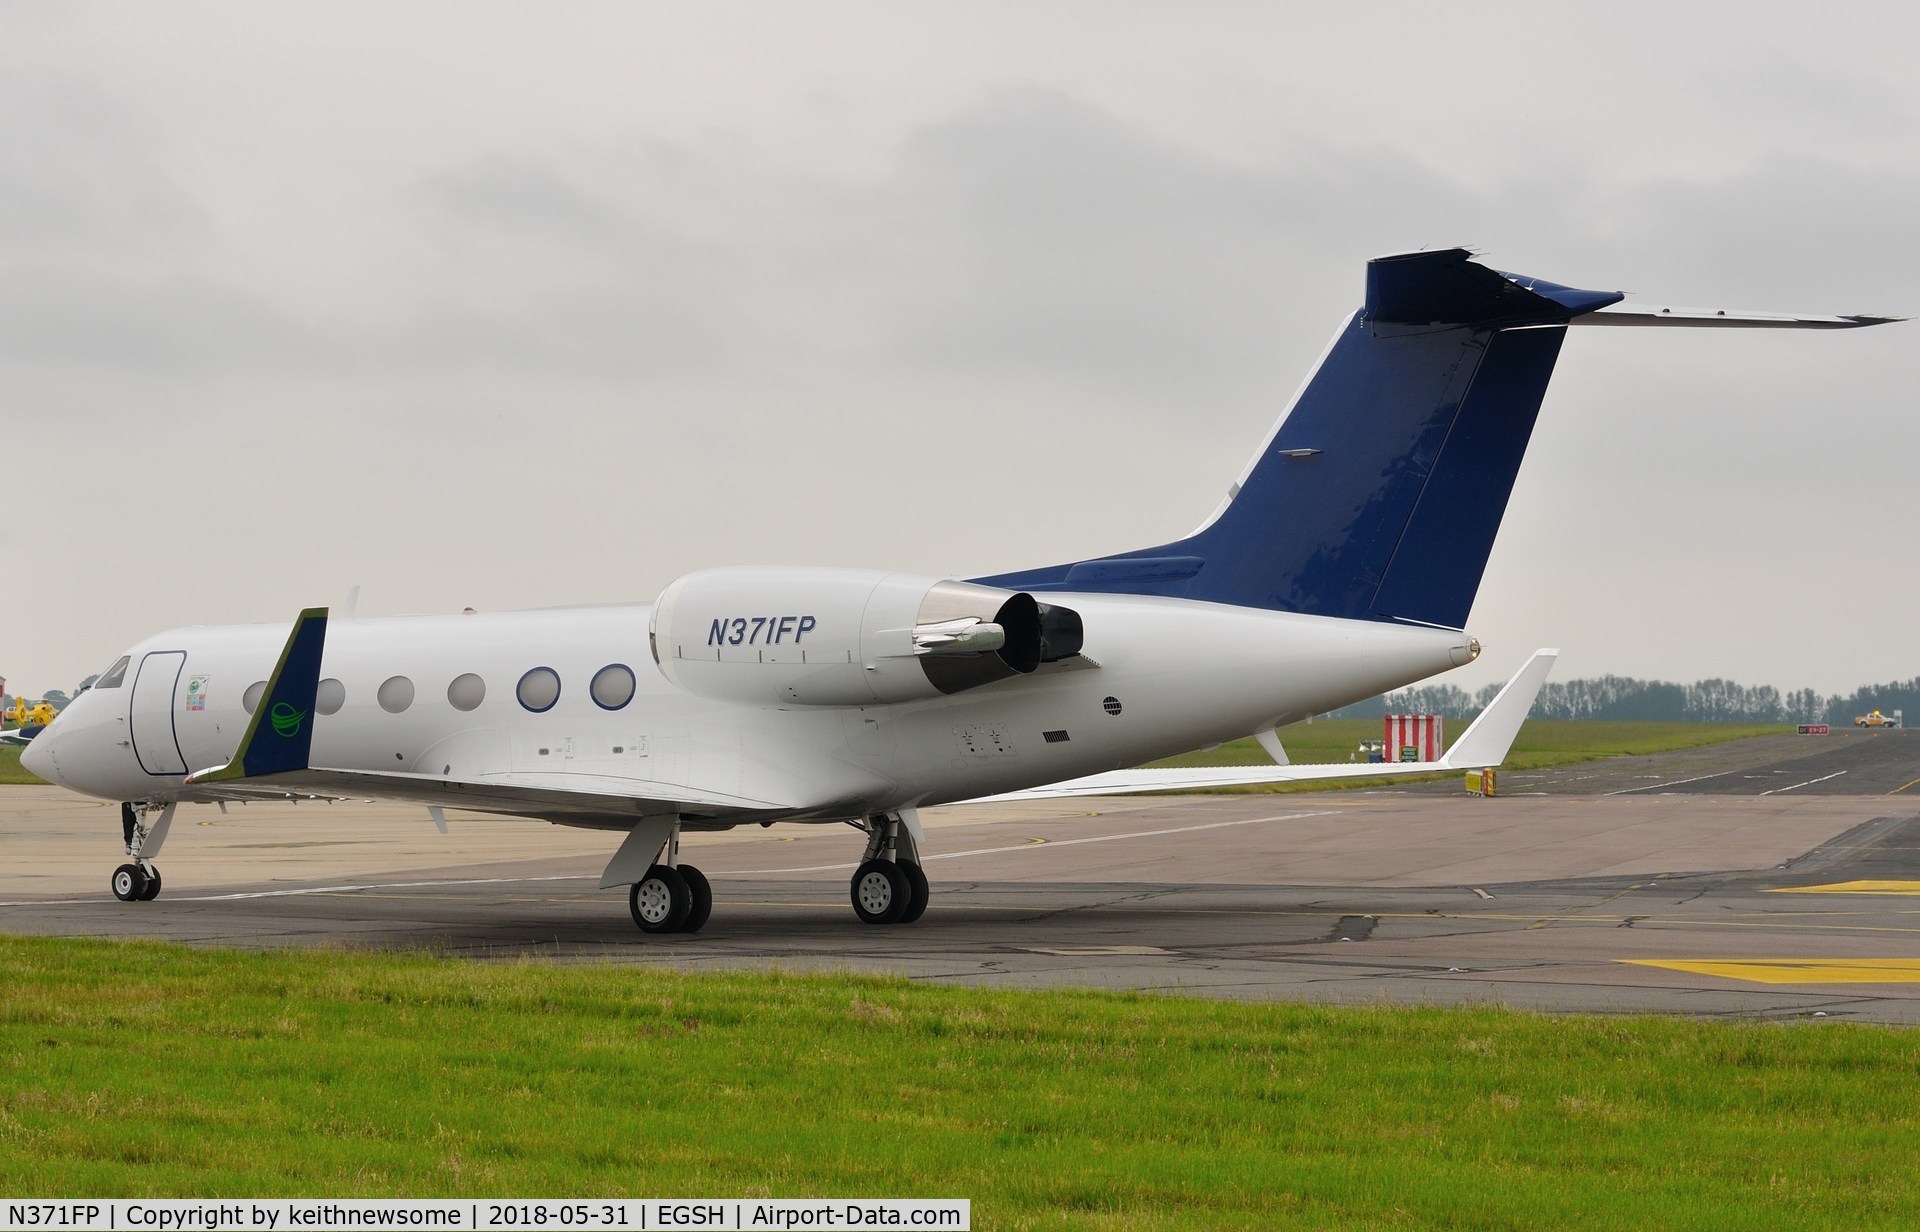 N371FP, 1999 Gulfstream Aerospace G-IV C/N 1371, Arriving at Norwich from USA.